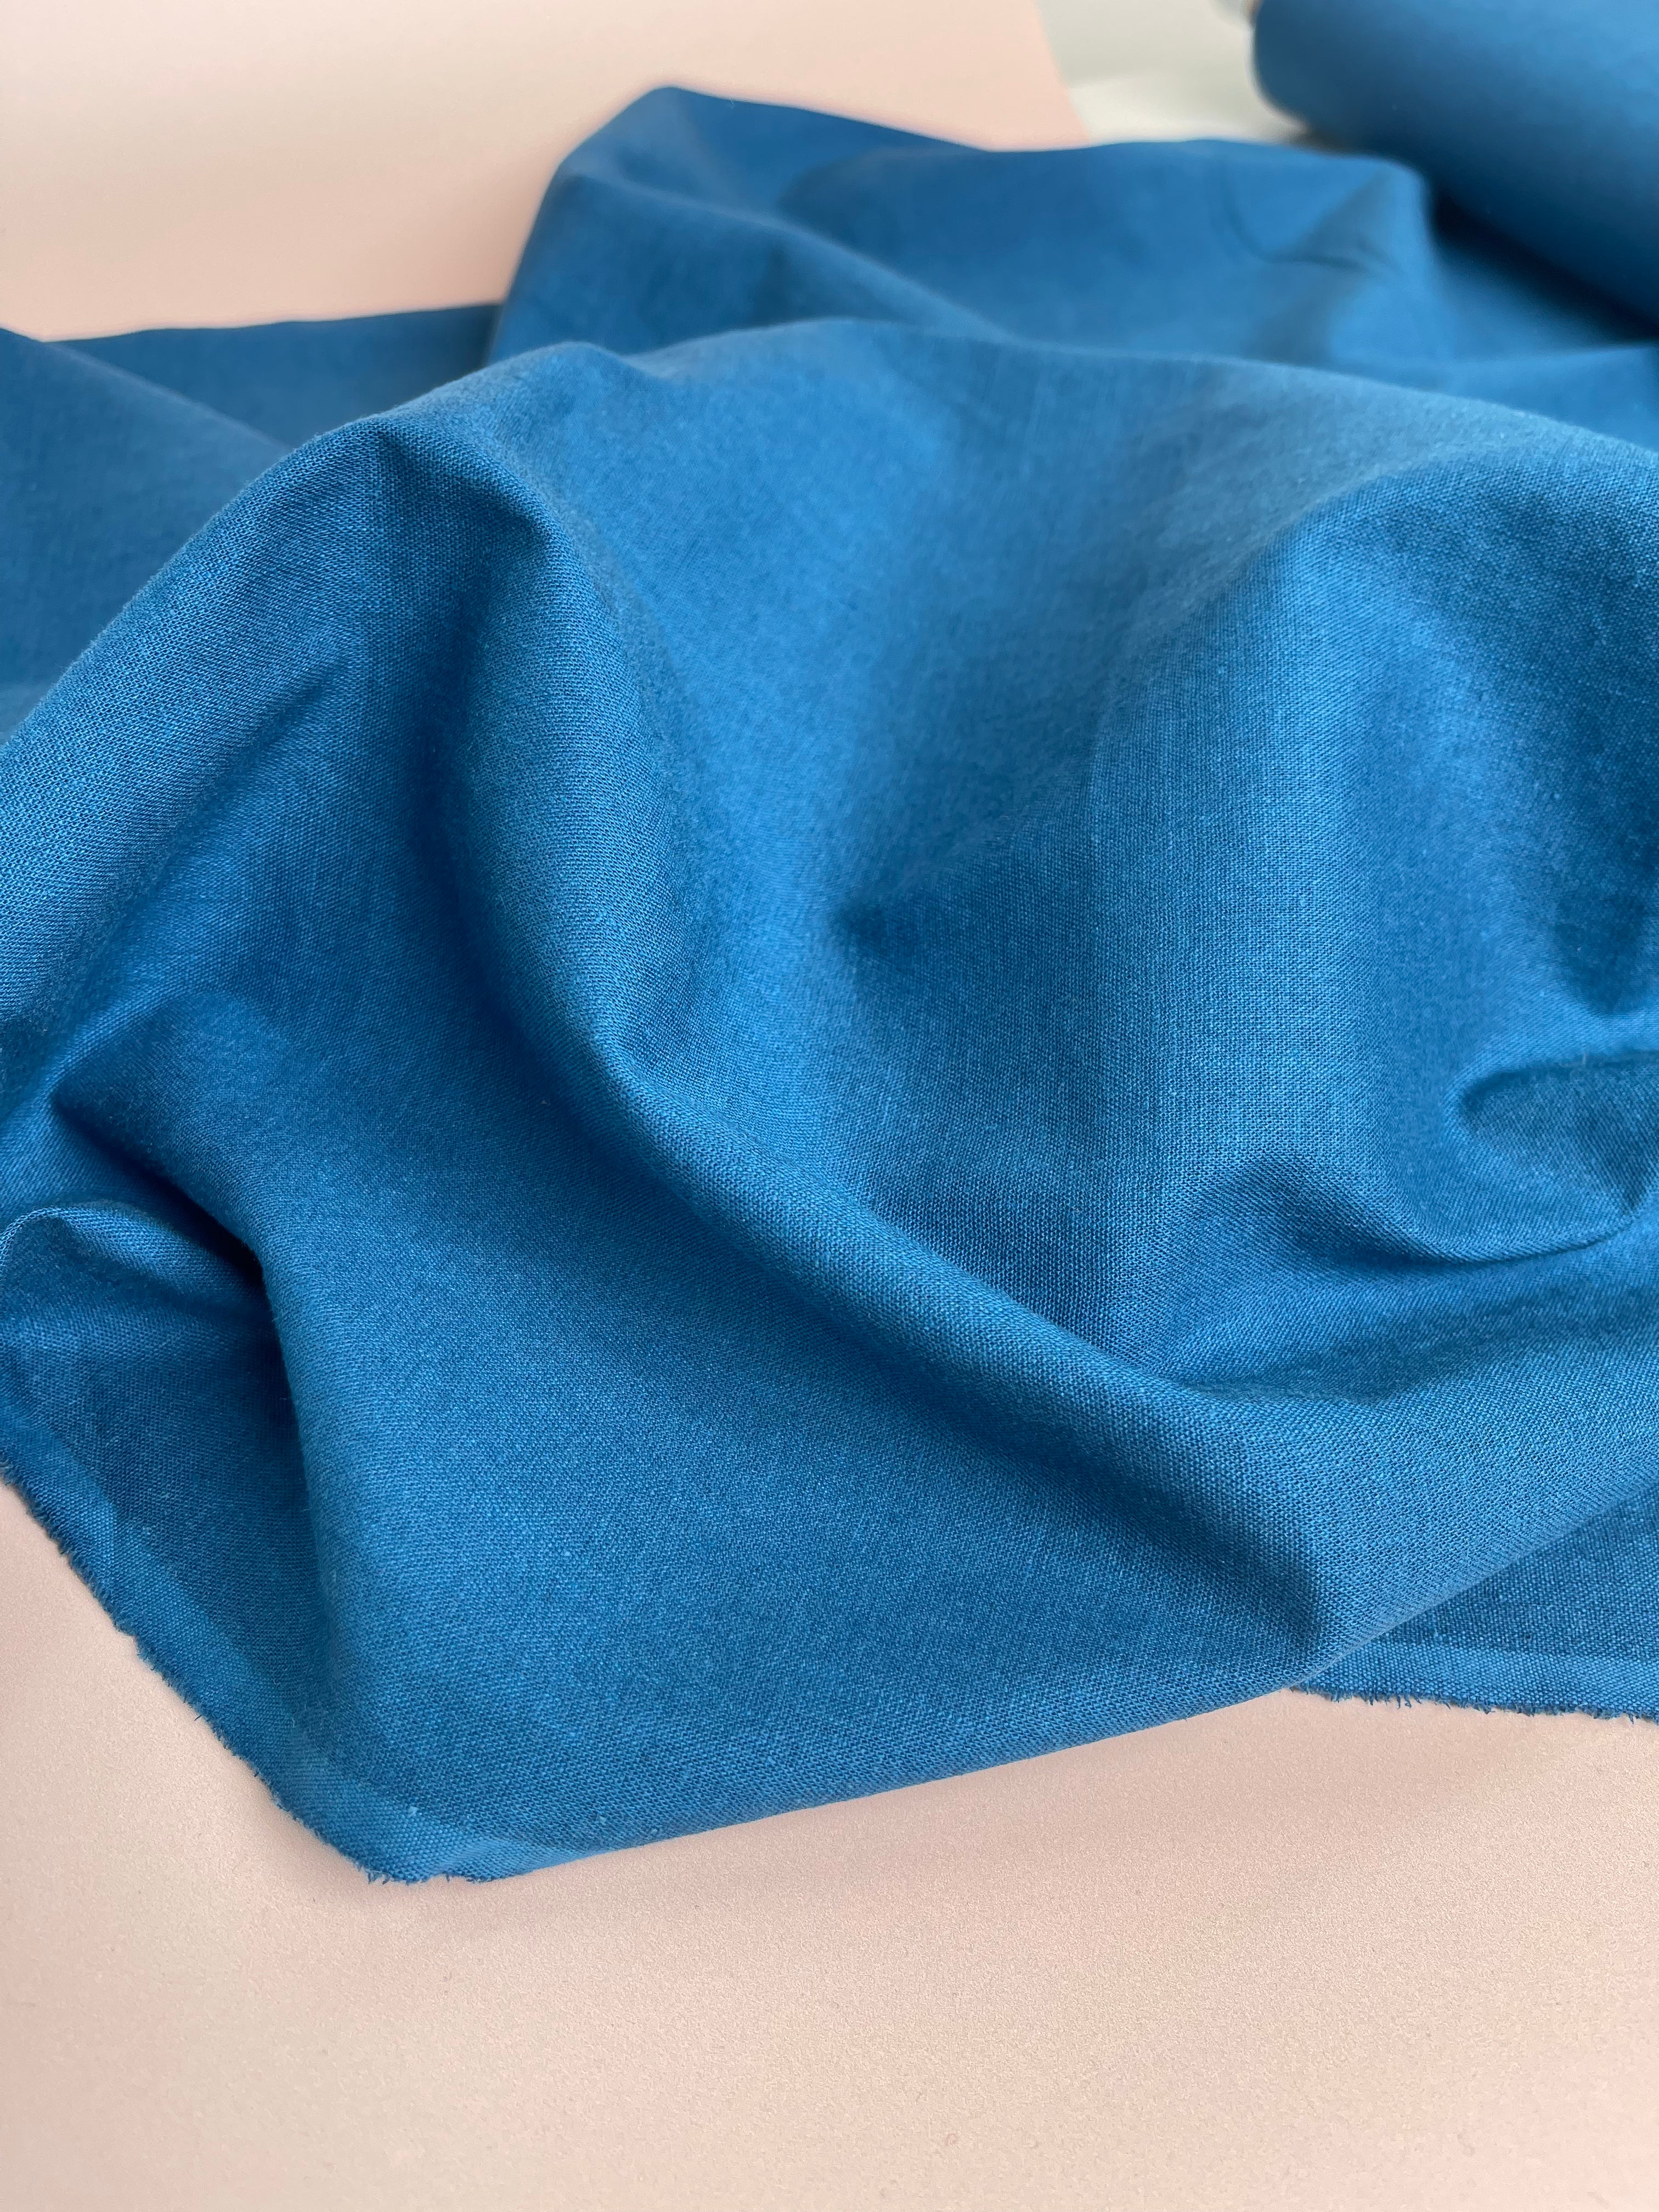 Sorona Linen in Moroccan Teal Blue - New Eco Linen Blend Fabric